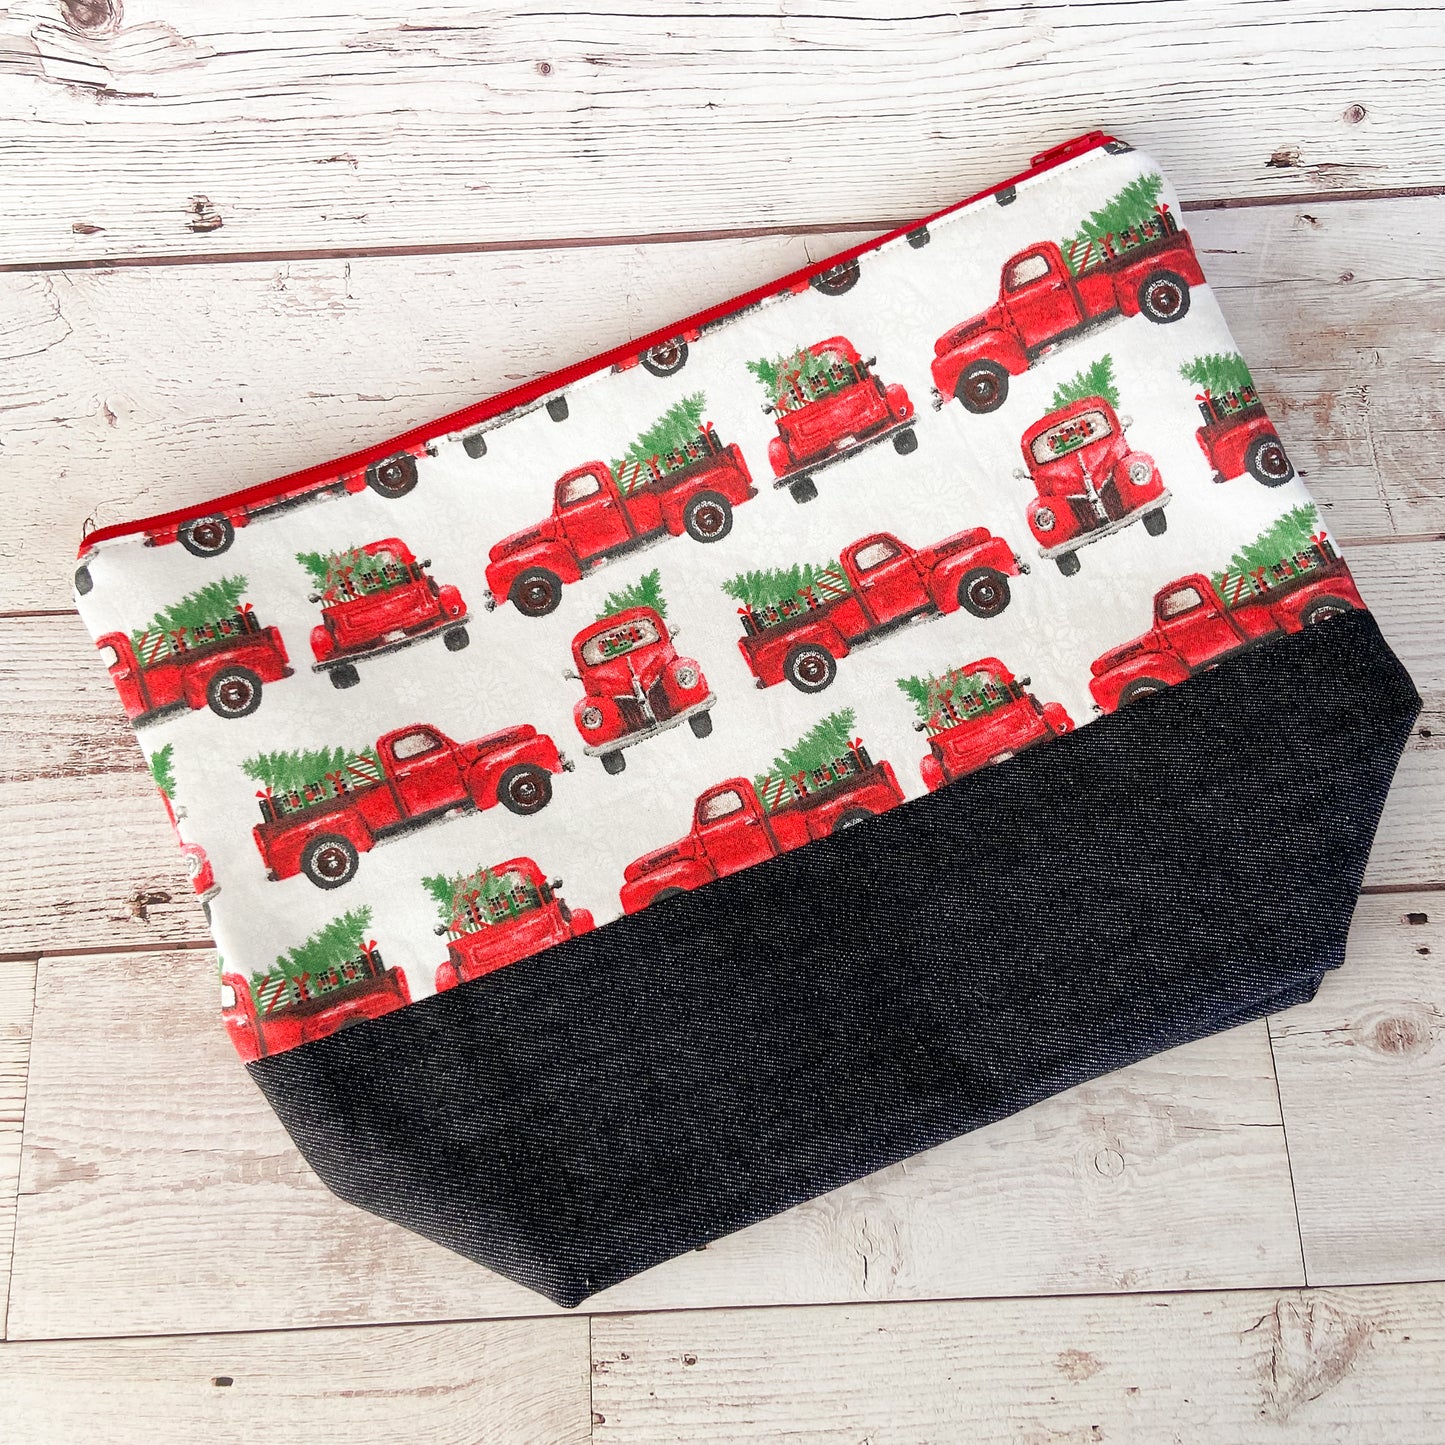 Denim - Shawl Zippered Project Bag - Classic Red Truck with Trees